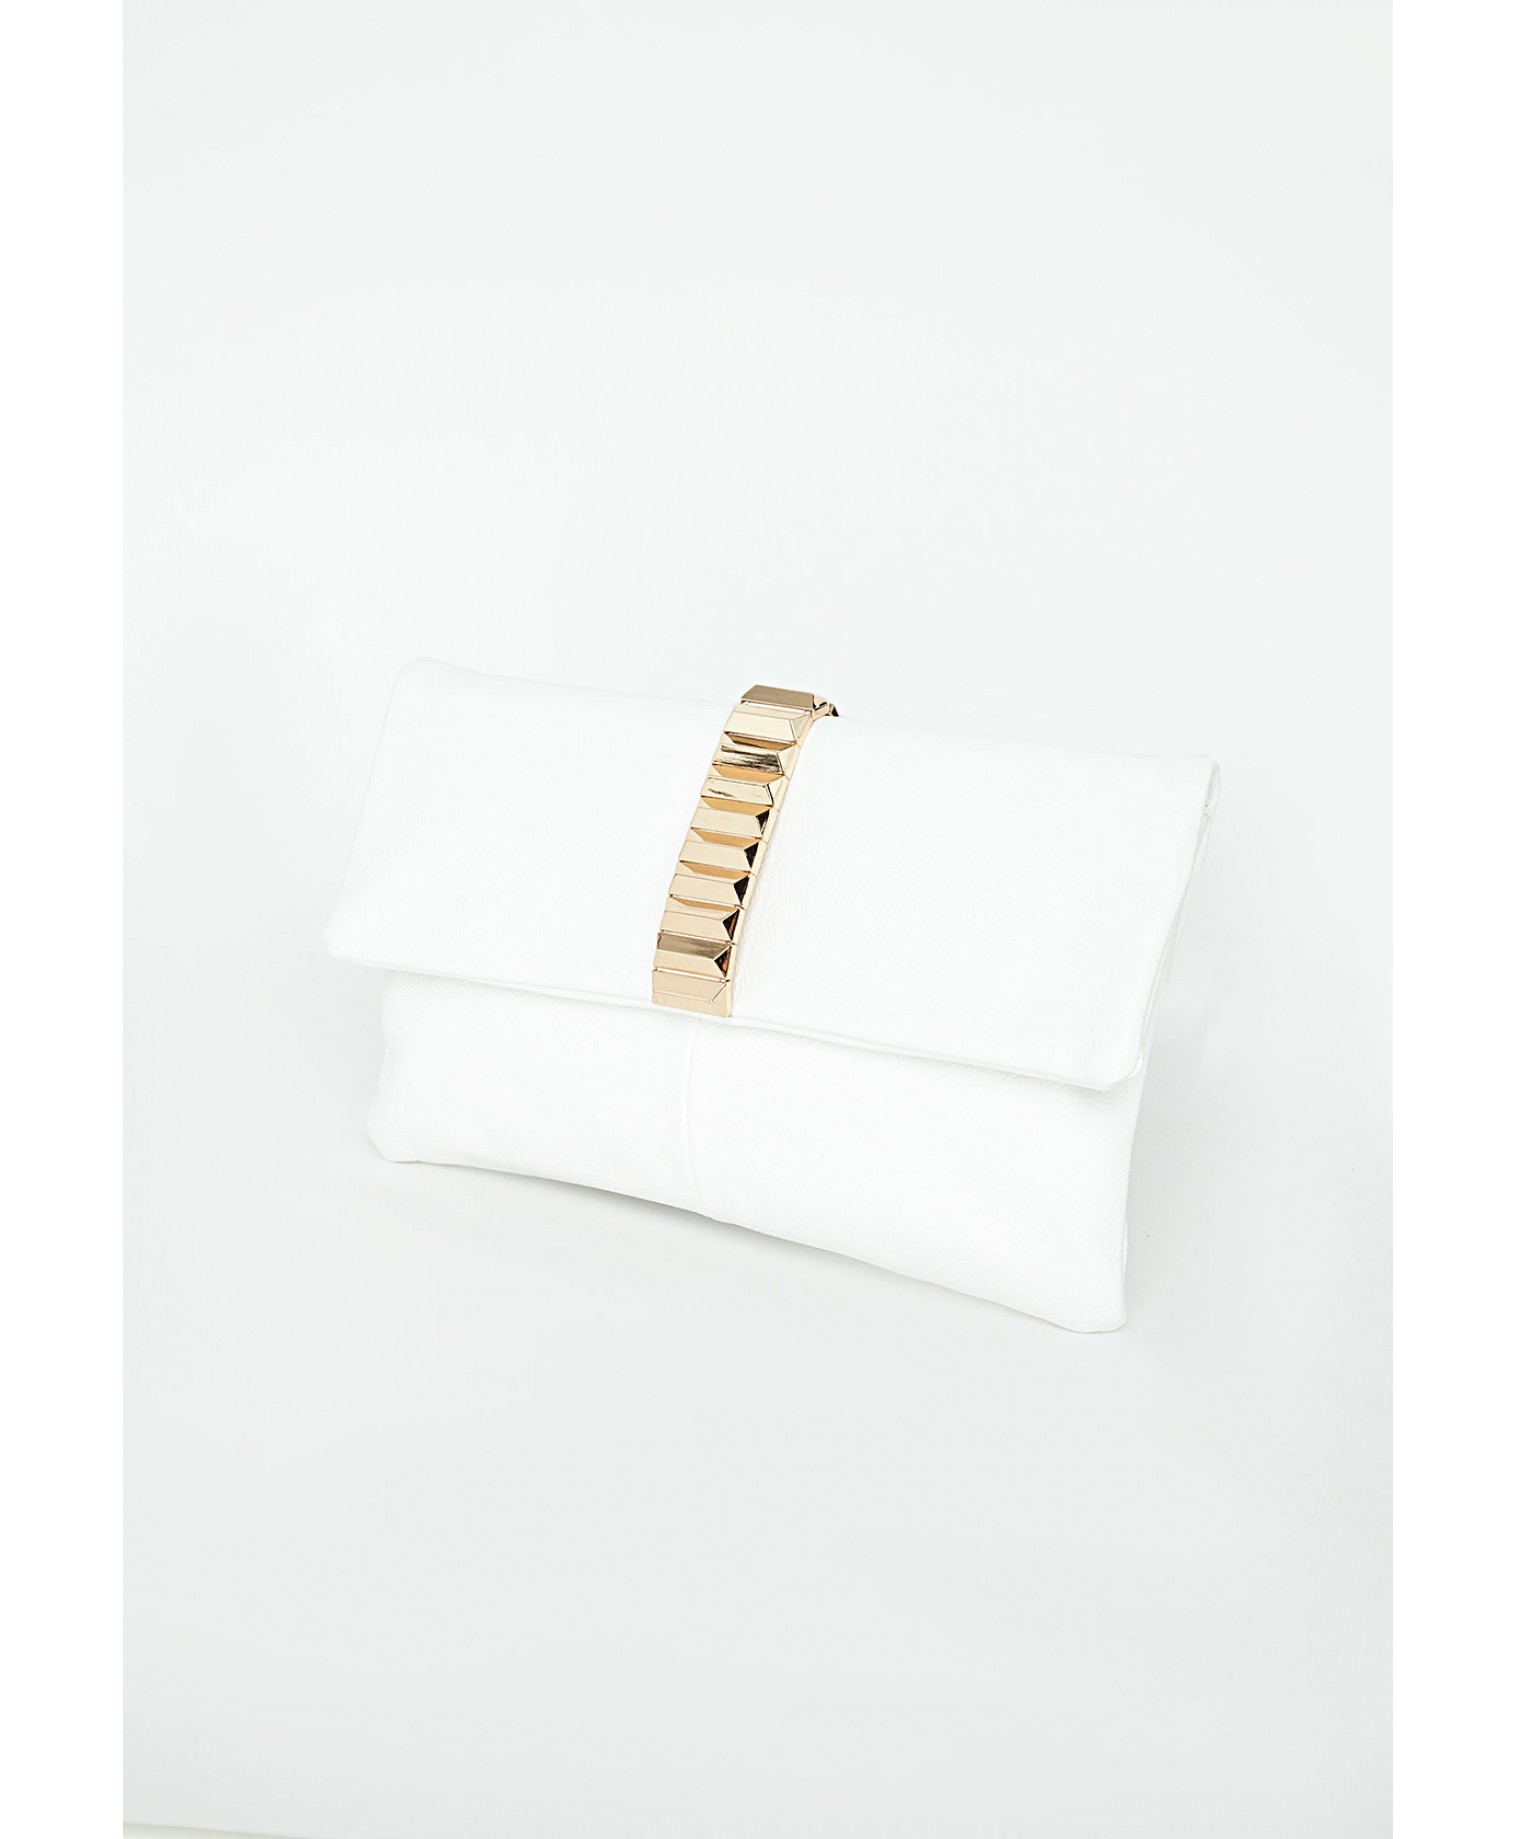 Missguided Saffron White Envelope Clutch Bag with Gold Detail - Lyst